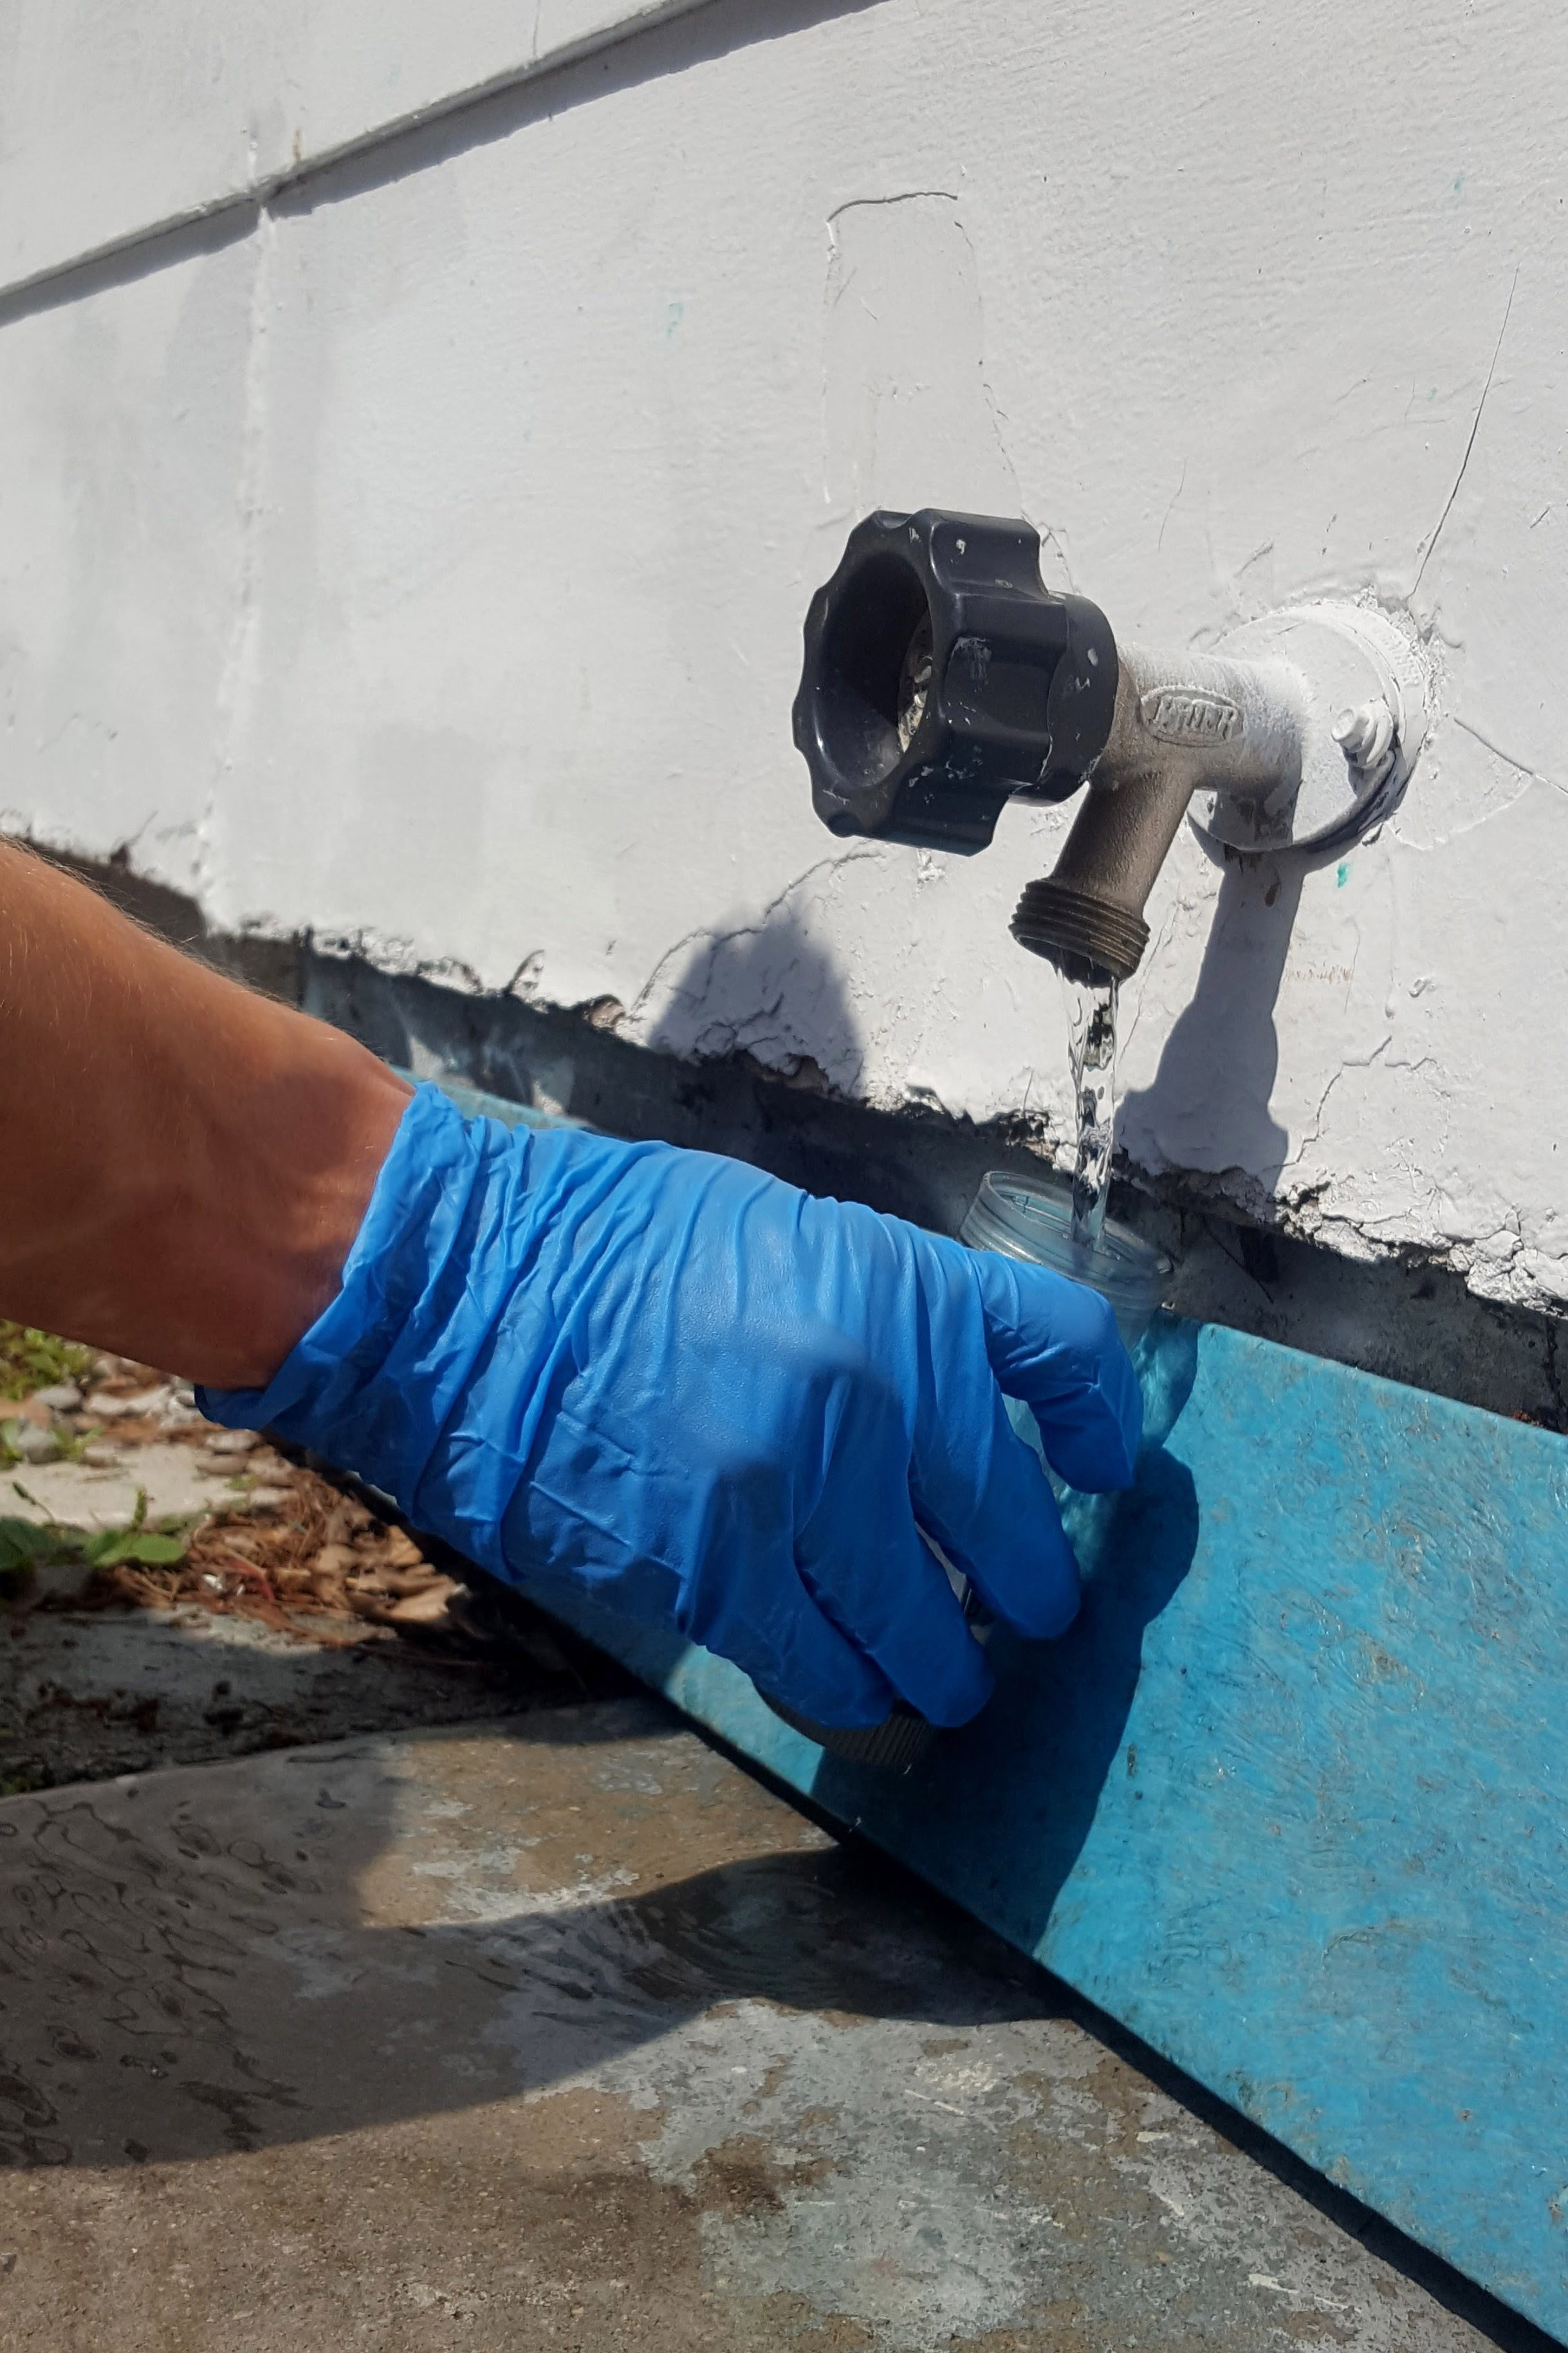 A person wearing a blue rubber glove takes a water sample from an outdoor water spigot.